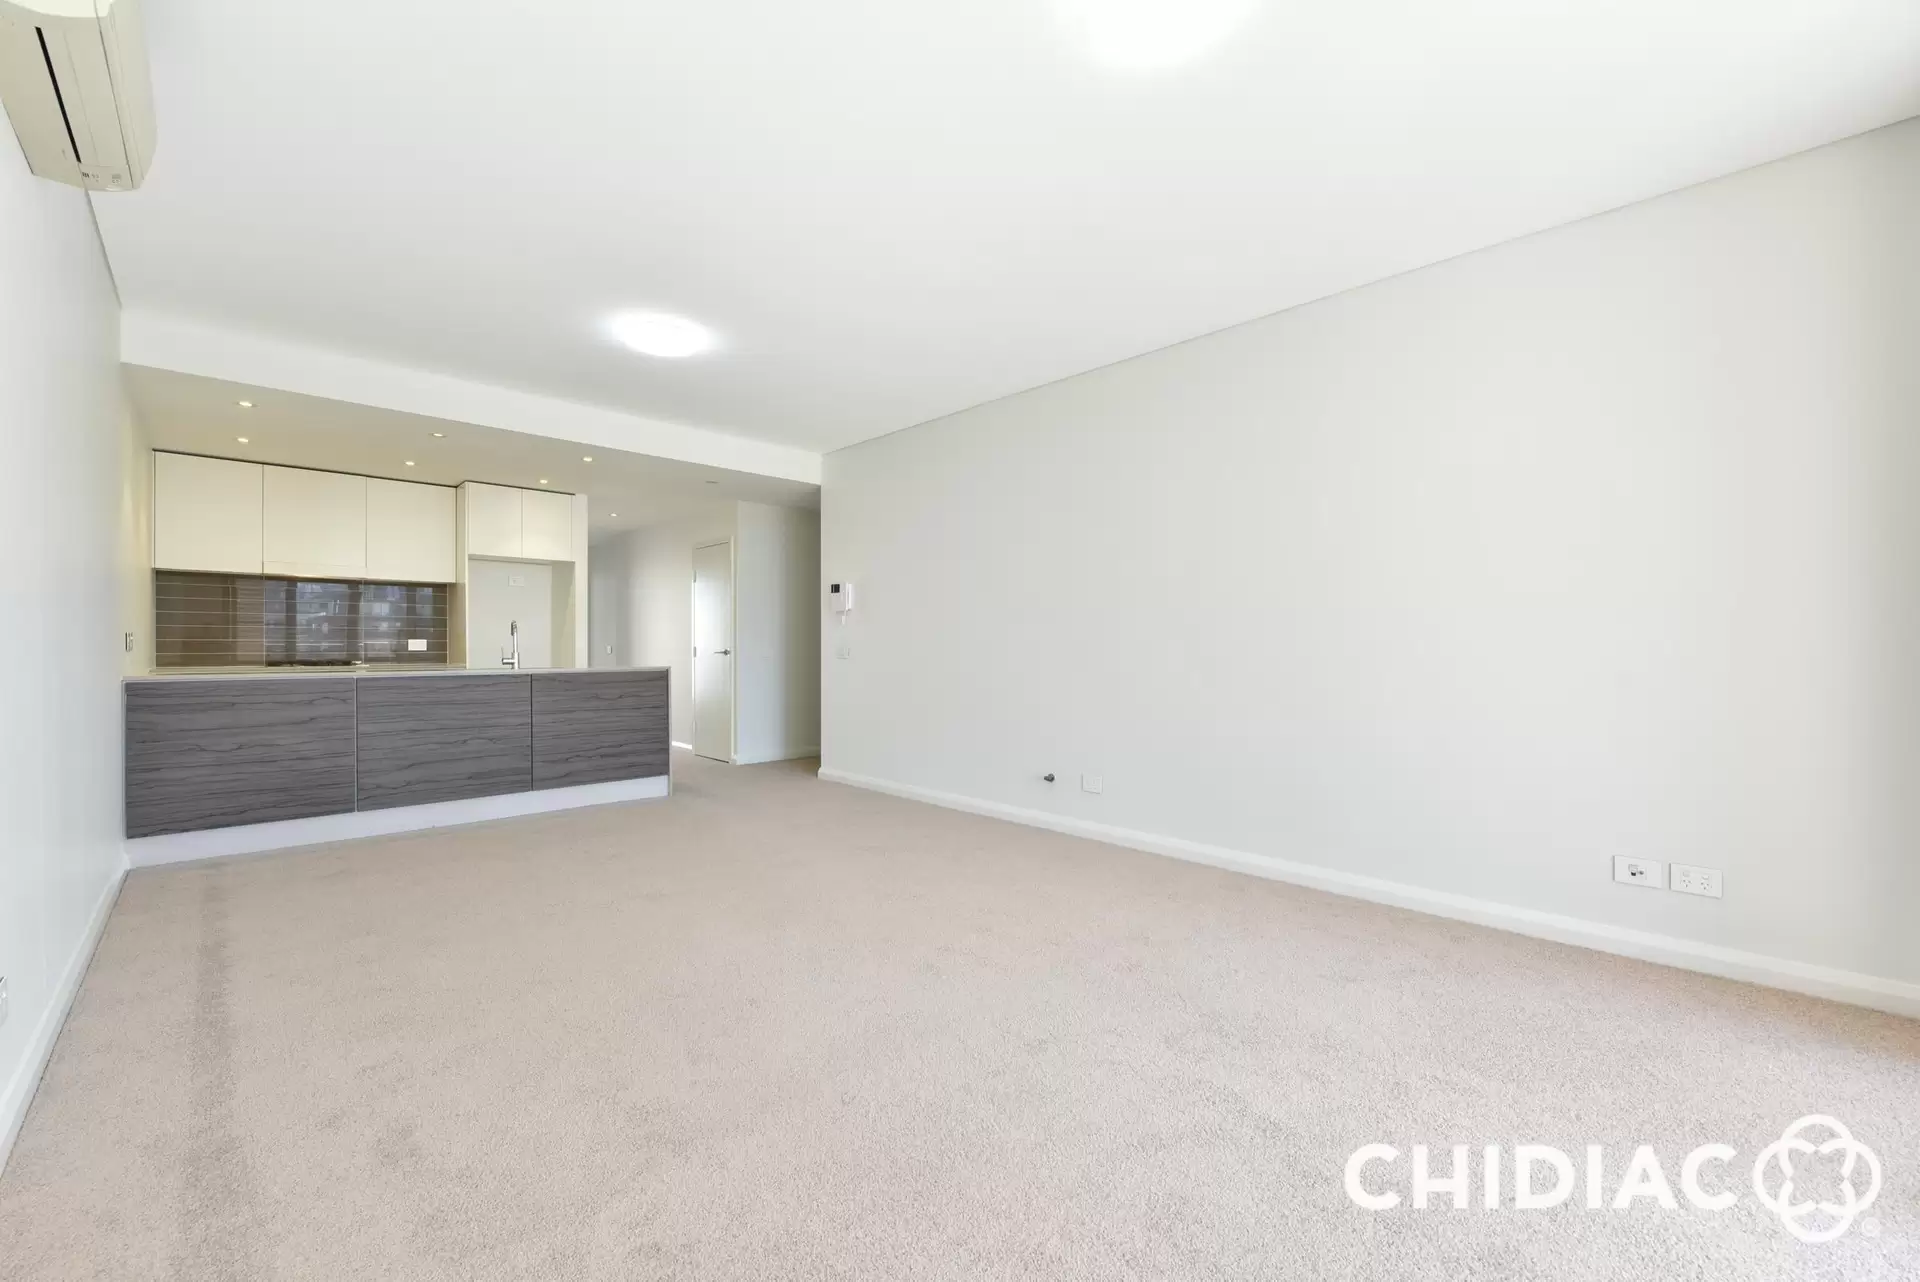 715/16 Baywater Drive, Wentworth Point Leased by Chidiac Realty - image 1